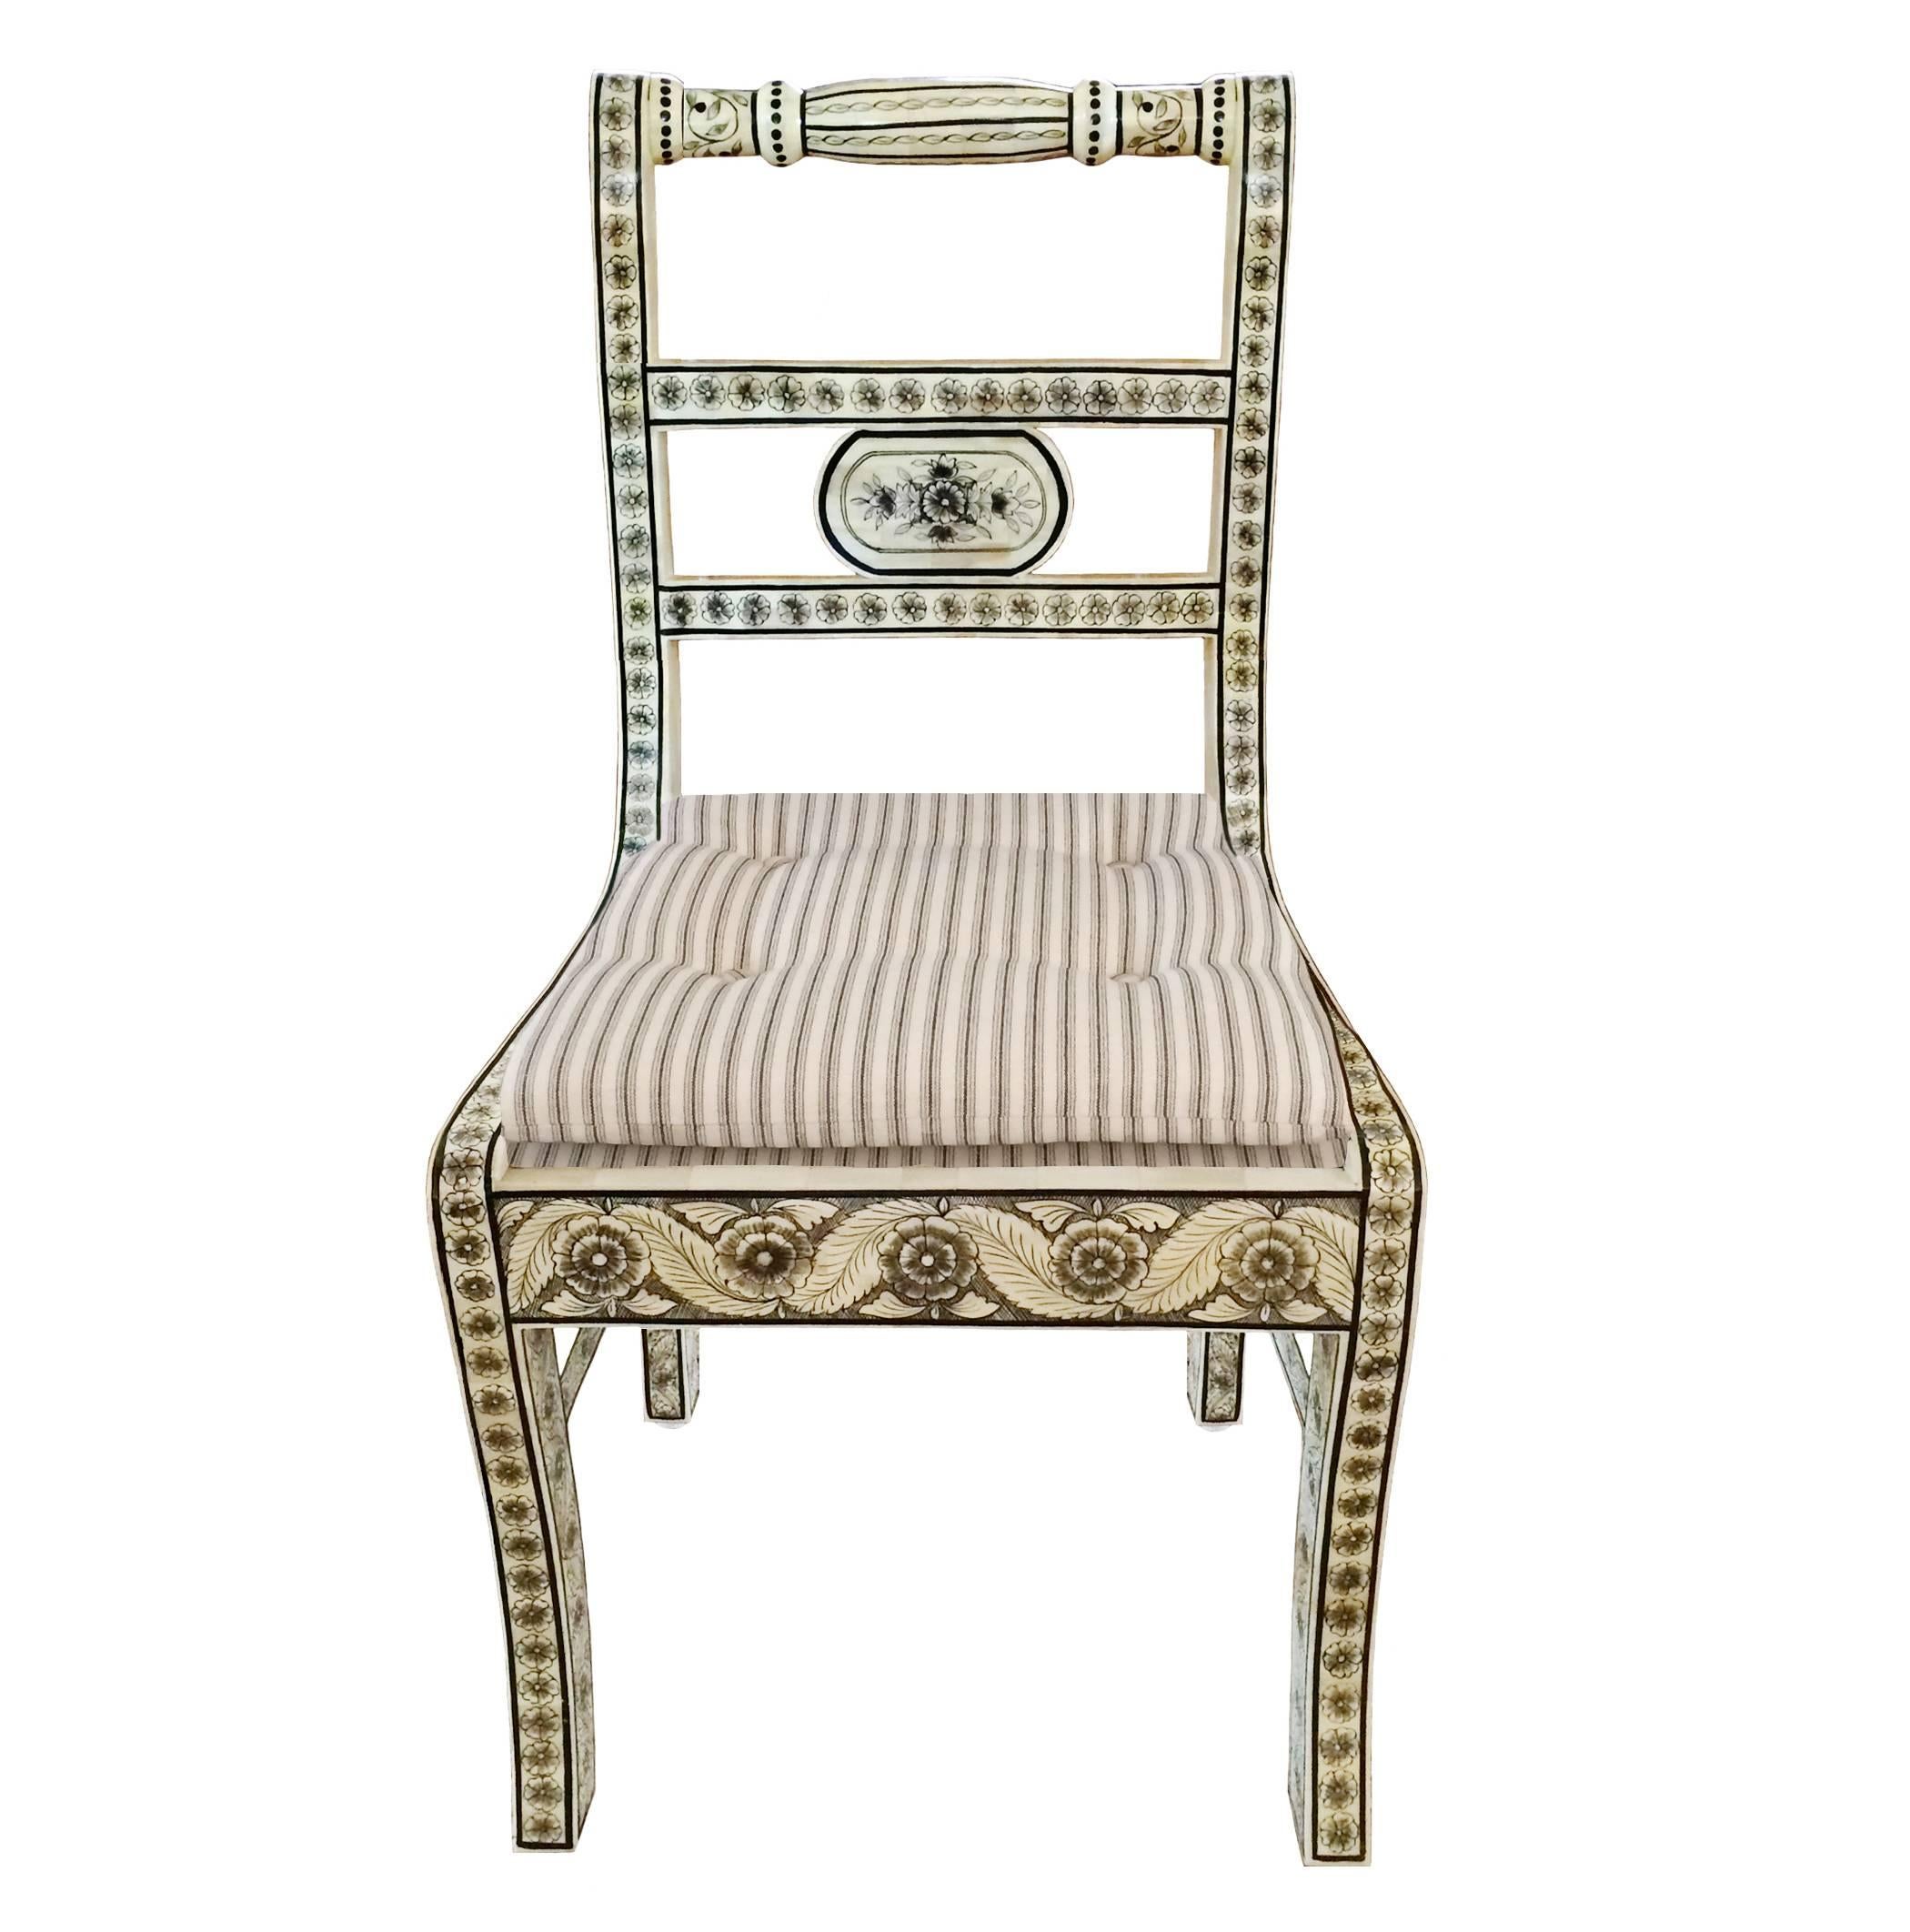 Anglo-Indian Regency style inlay chair with French ticking cushion; early 20th century.